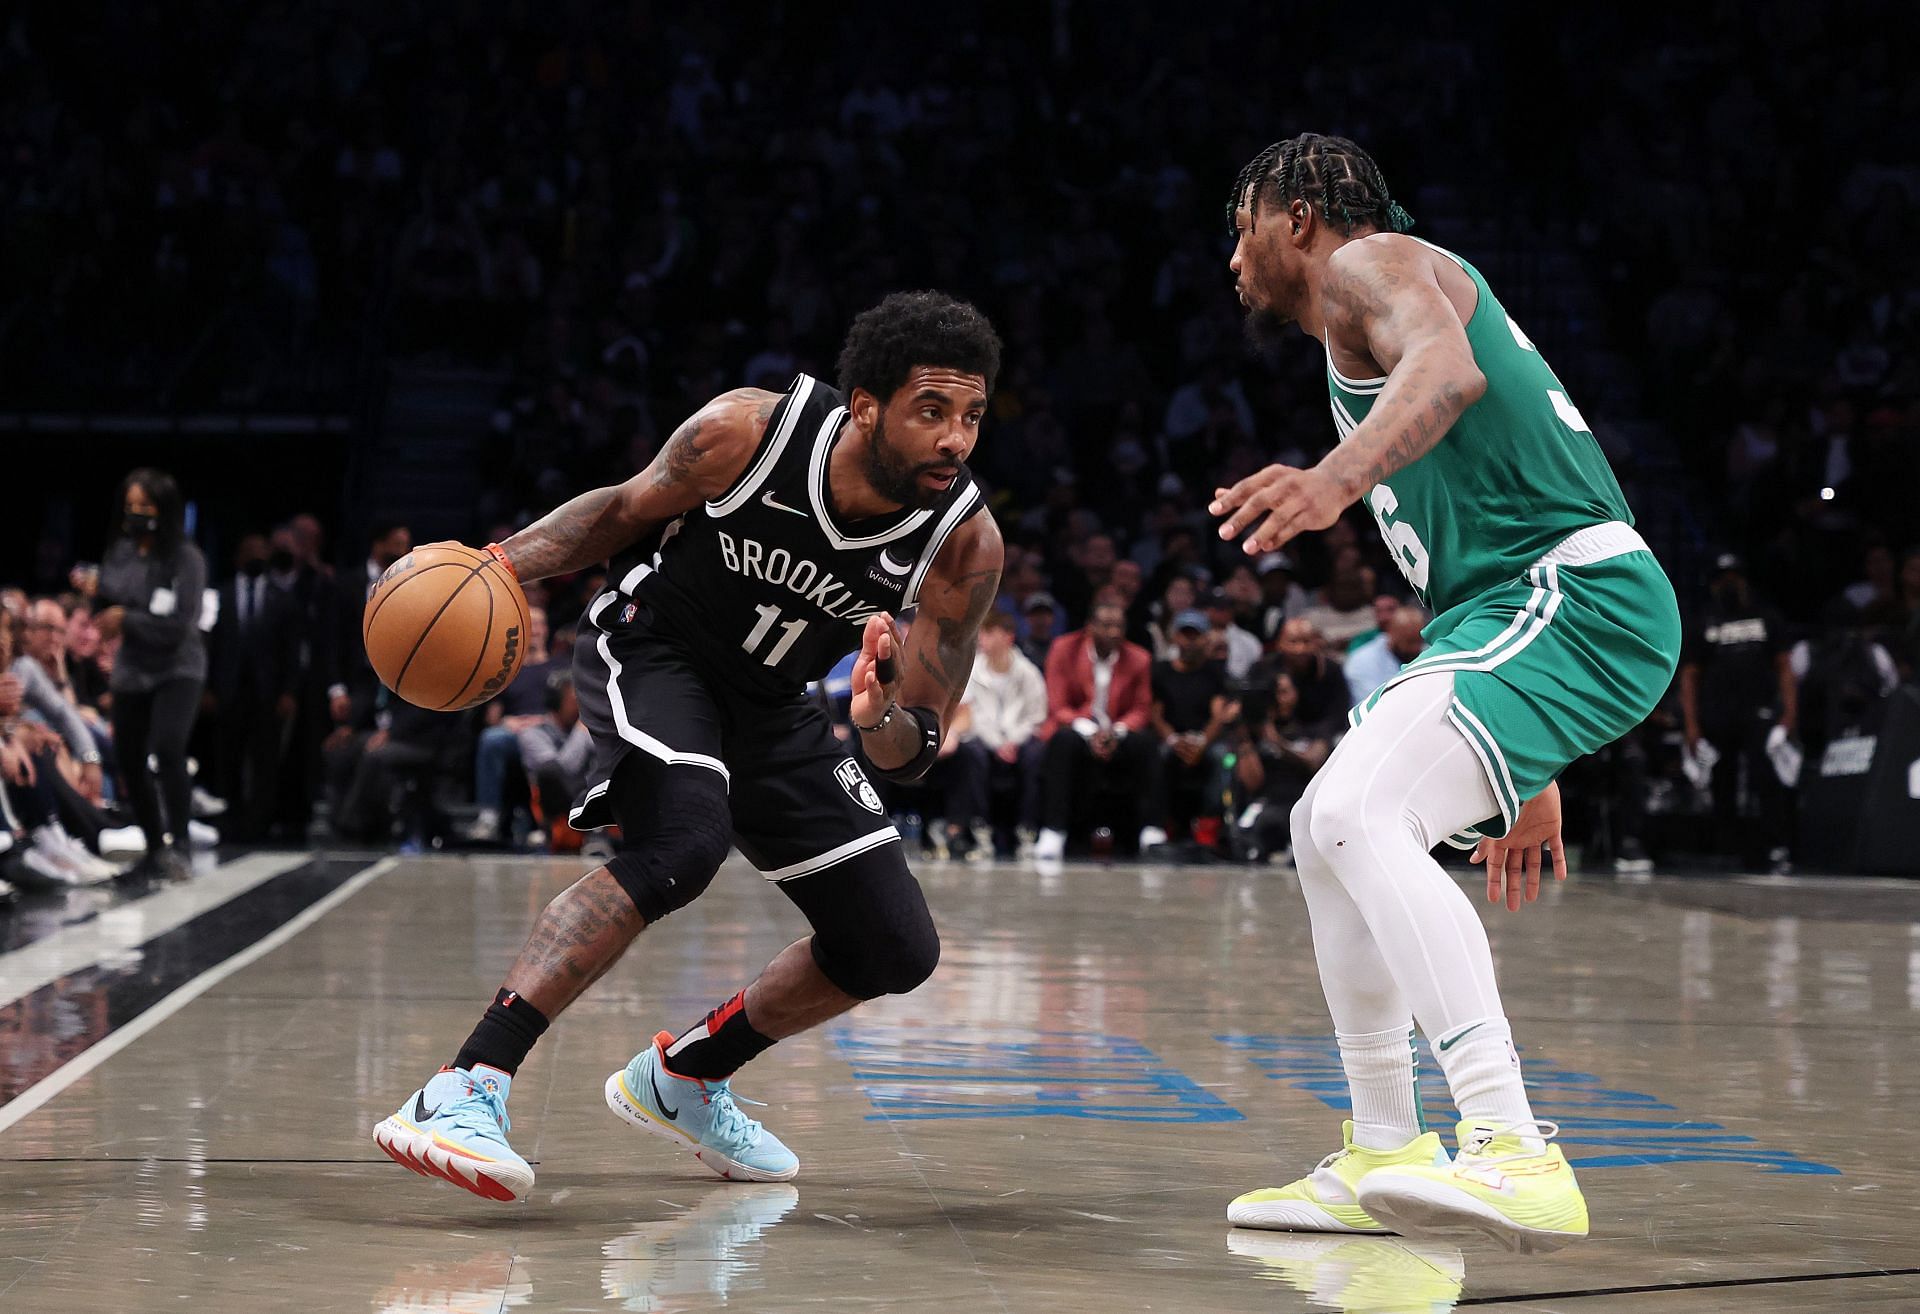 Kyrie Irving #11 of the Brooklyn Nets drives against Marcus Smart #36 of the Boston Celtics